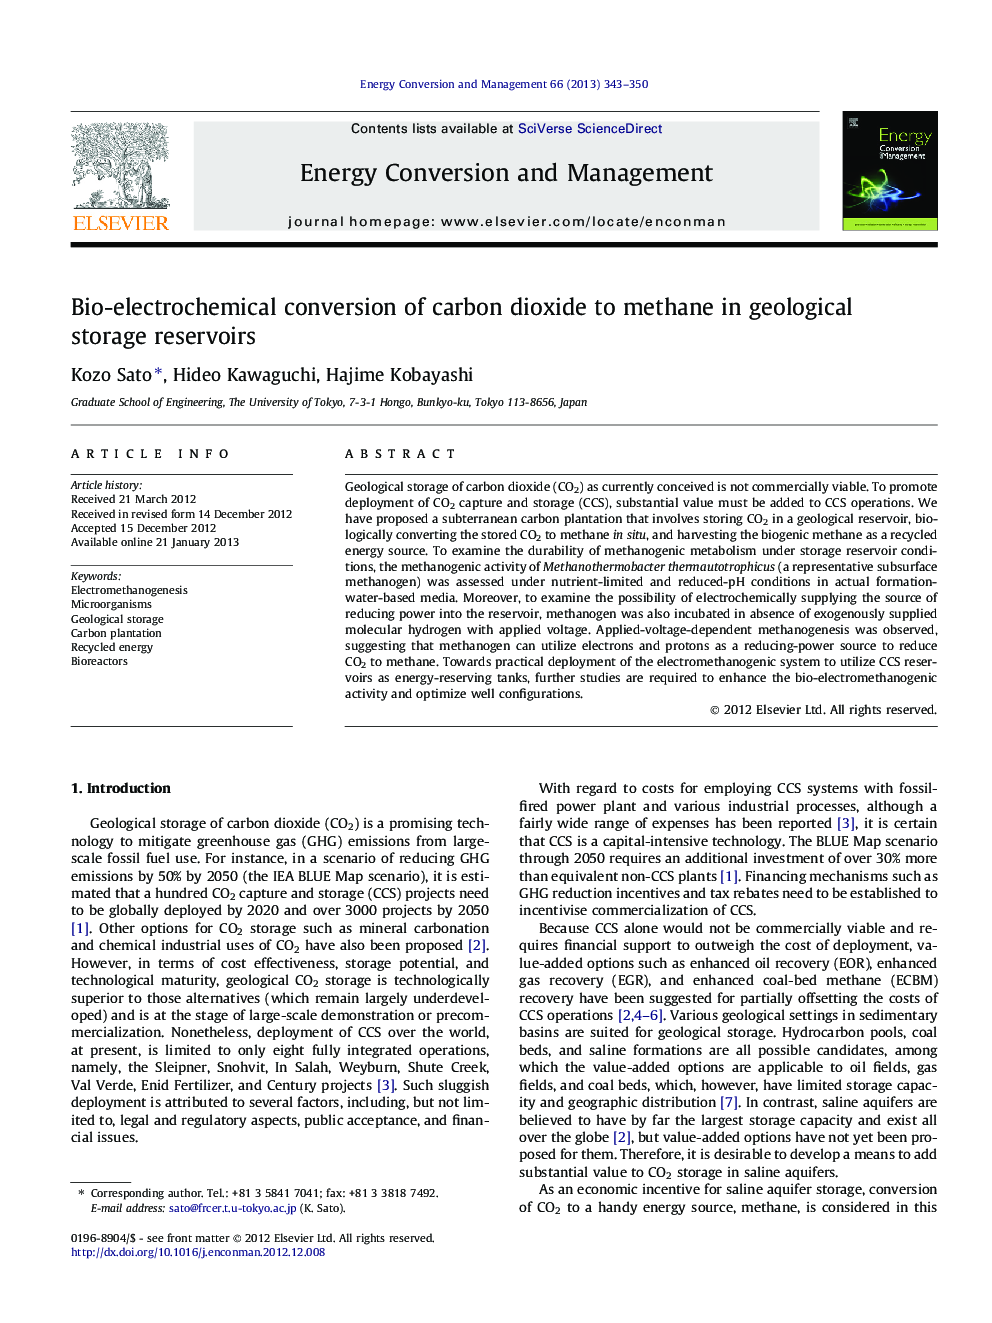 Bio-electrochemical conversion of carbon dioxide to methane in geological storage reservoirs